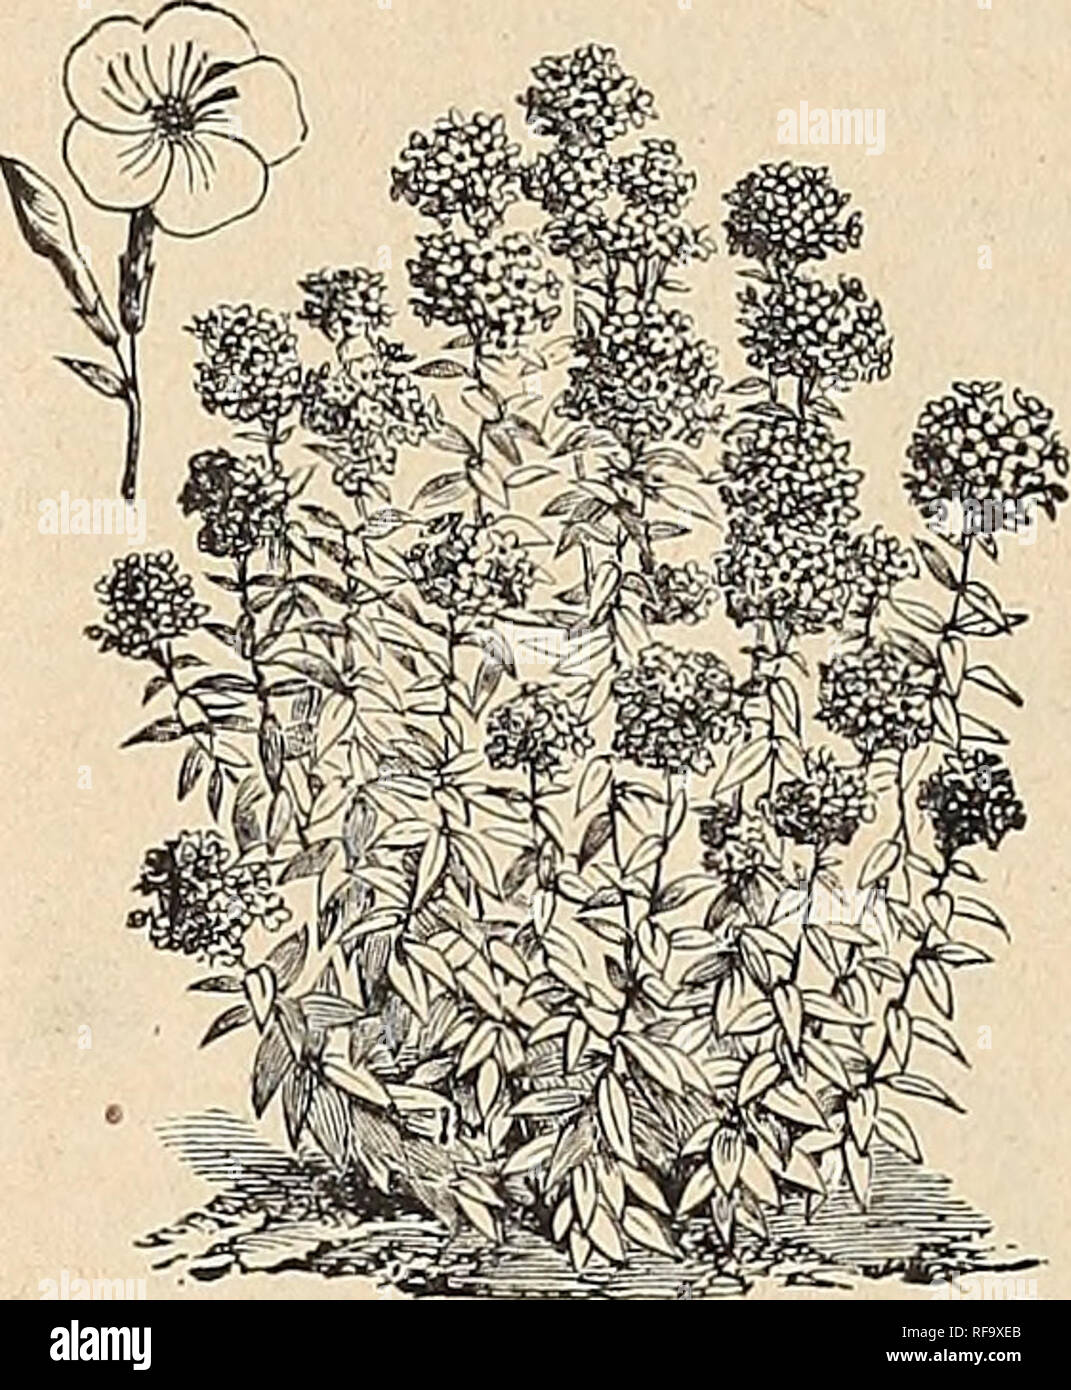 . Catalogue of Holland bulbs and plants : for fall planting.. Bulbs (Plants), Catalogs; Flowers, Catalogs. Hiram Sibley &amp; Co.''s SMILAX,. PEKENiNIAL PHLOX. Nothing excels the Smilax as a vine or climber; leaves beautiful glossy green; extremely graceful, and can be trained to run in any direction ; fine for pots, vases or baskets. Water three times per week. 20 cents each ; |2.00 per dozen. PHLOX. This genus comprises most elegant border flowers, and is valuable for any position requiring masses of bloom. The Perepnials are entirely hardy and of easy cultivation. Plants should be divided e Stock Photo